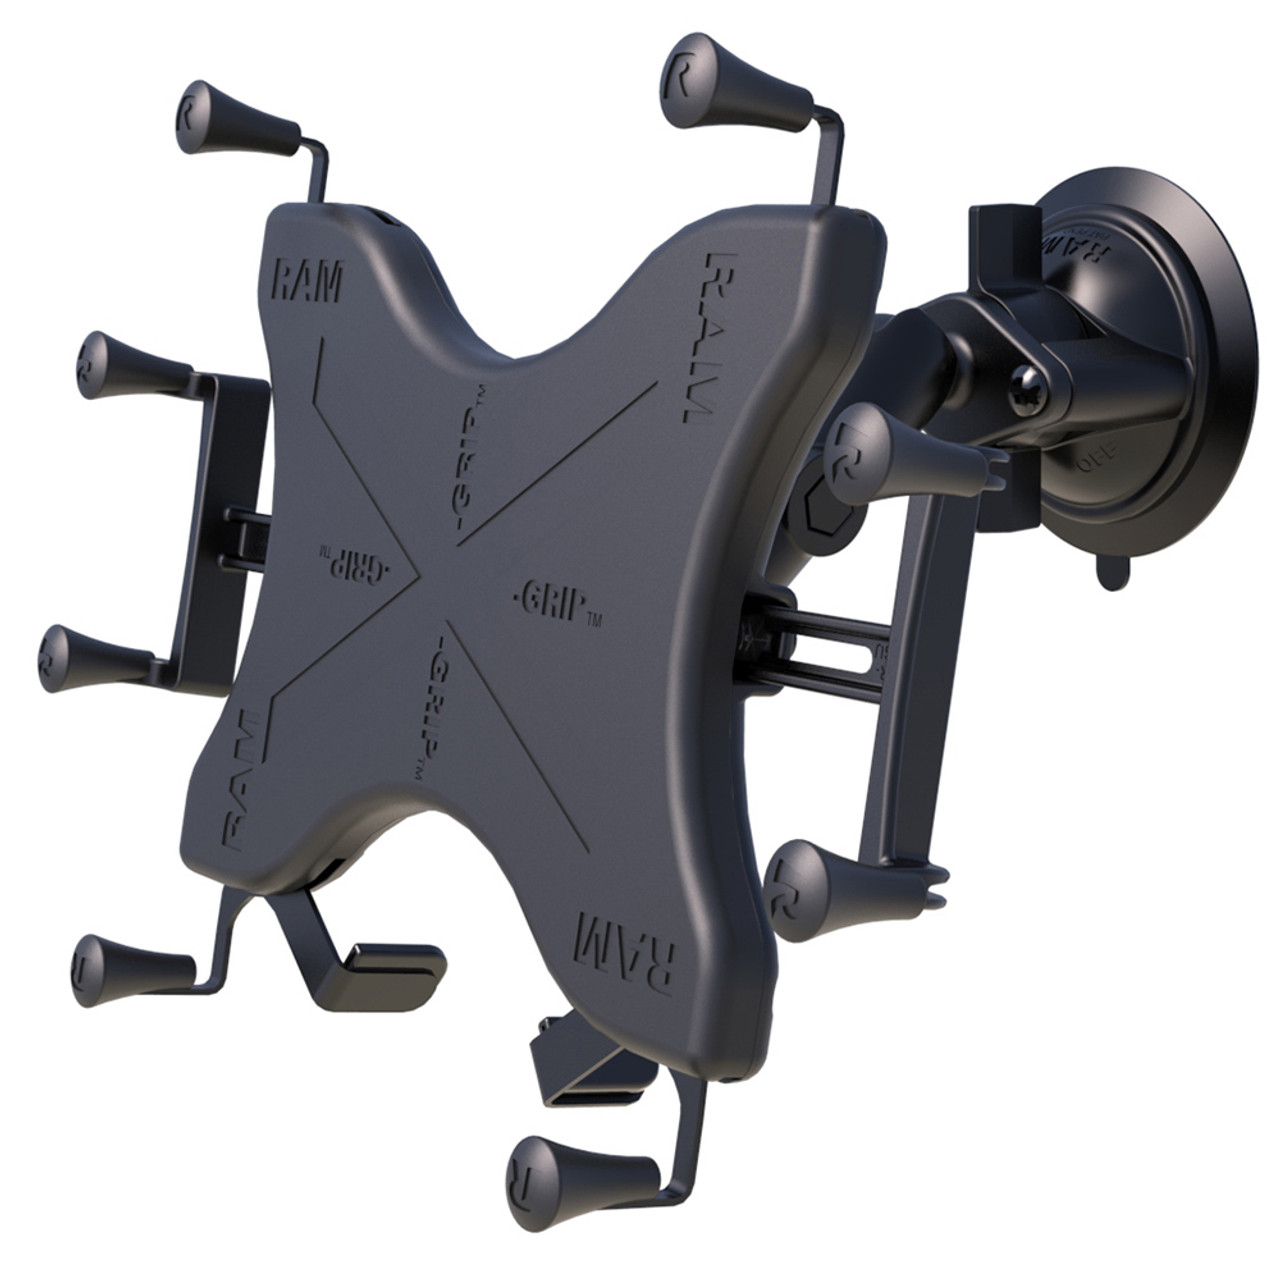 Suction Cup Mount (10)